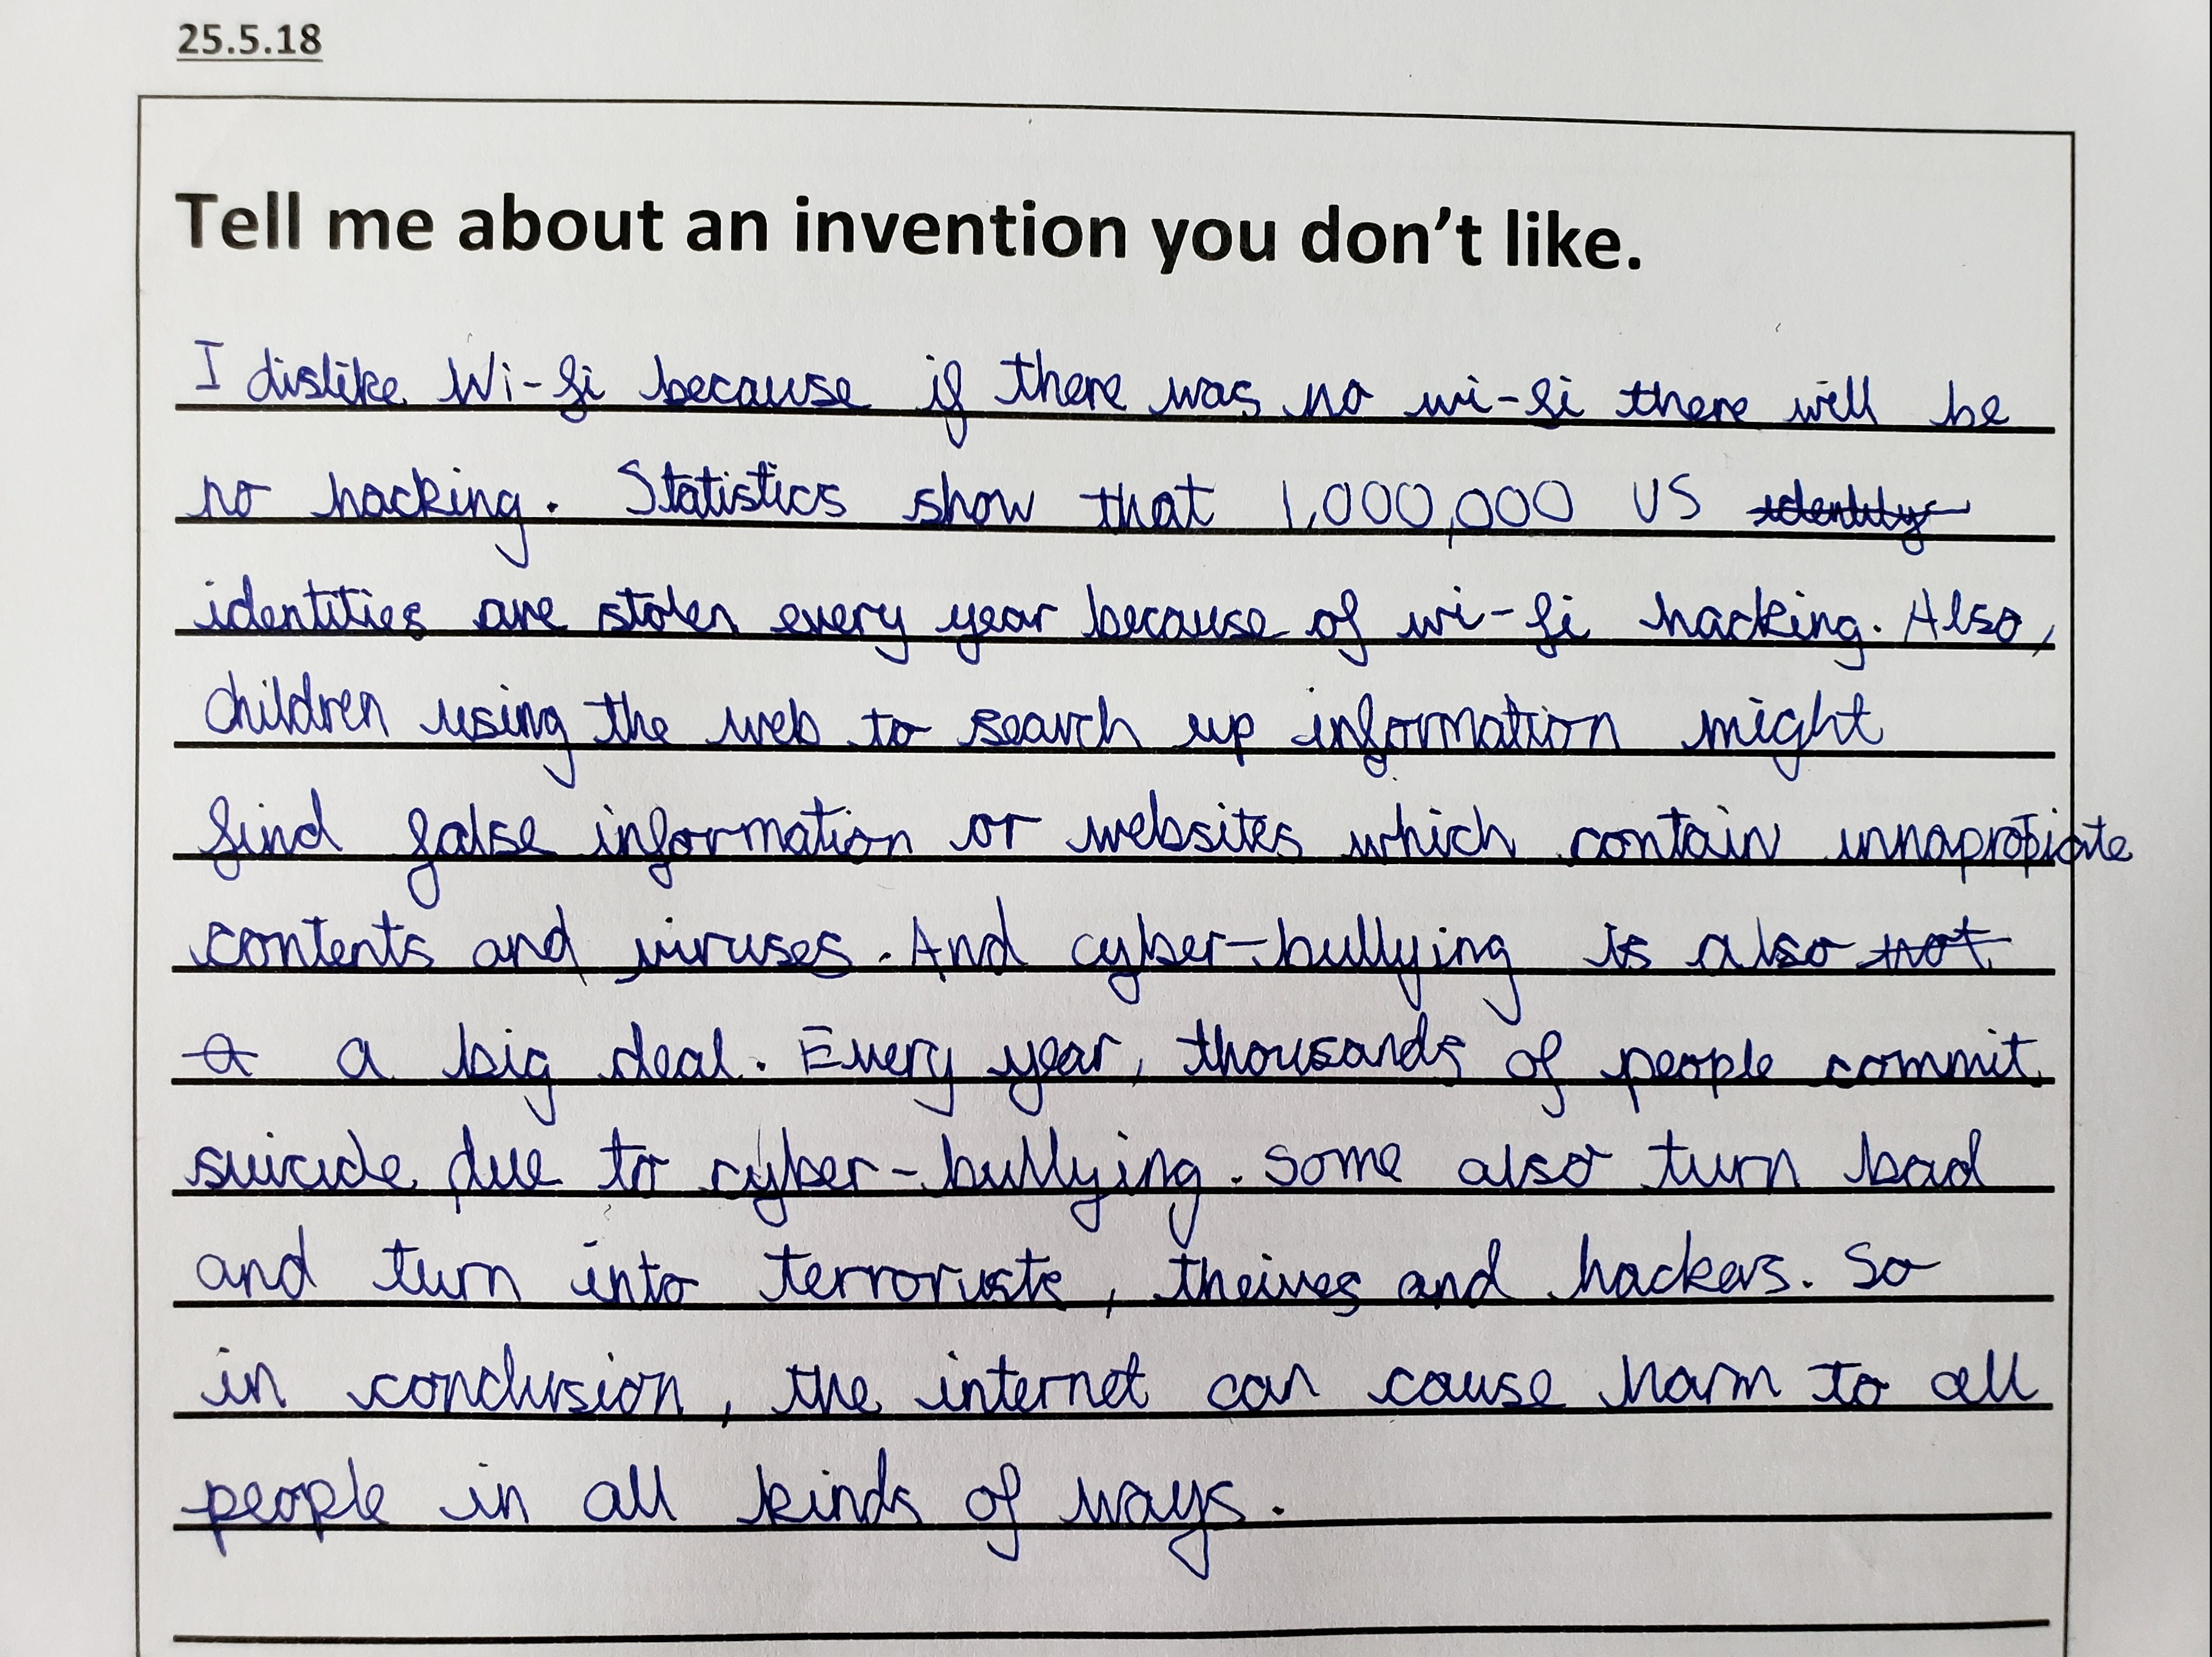 Children's opinions about inventions